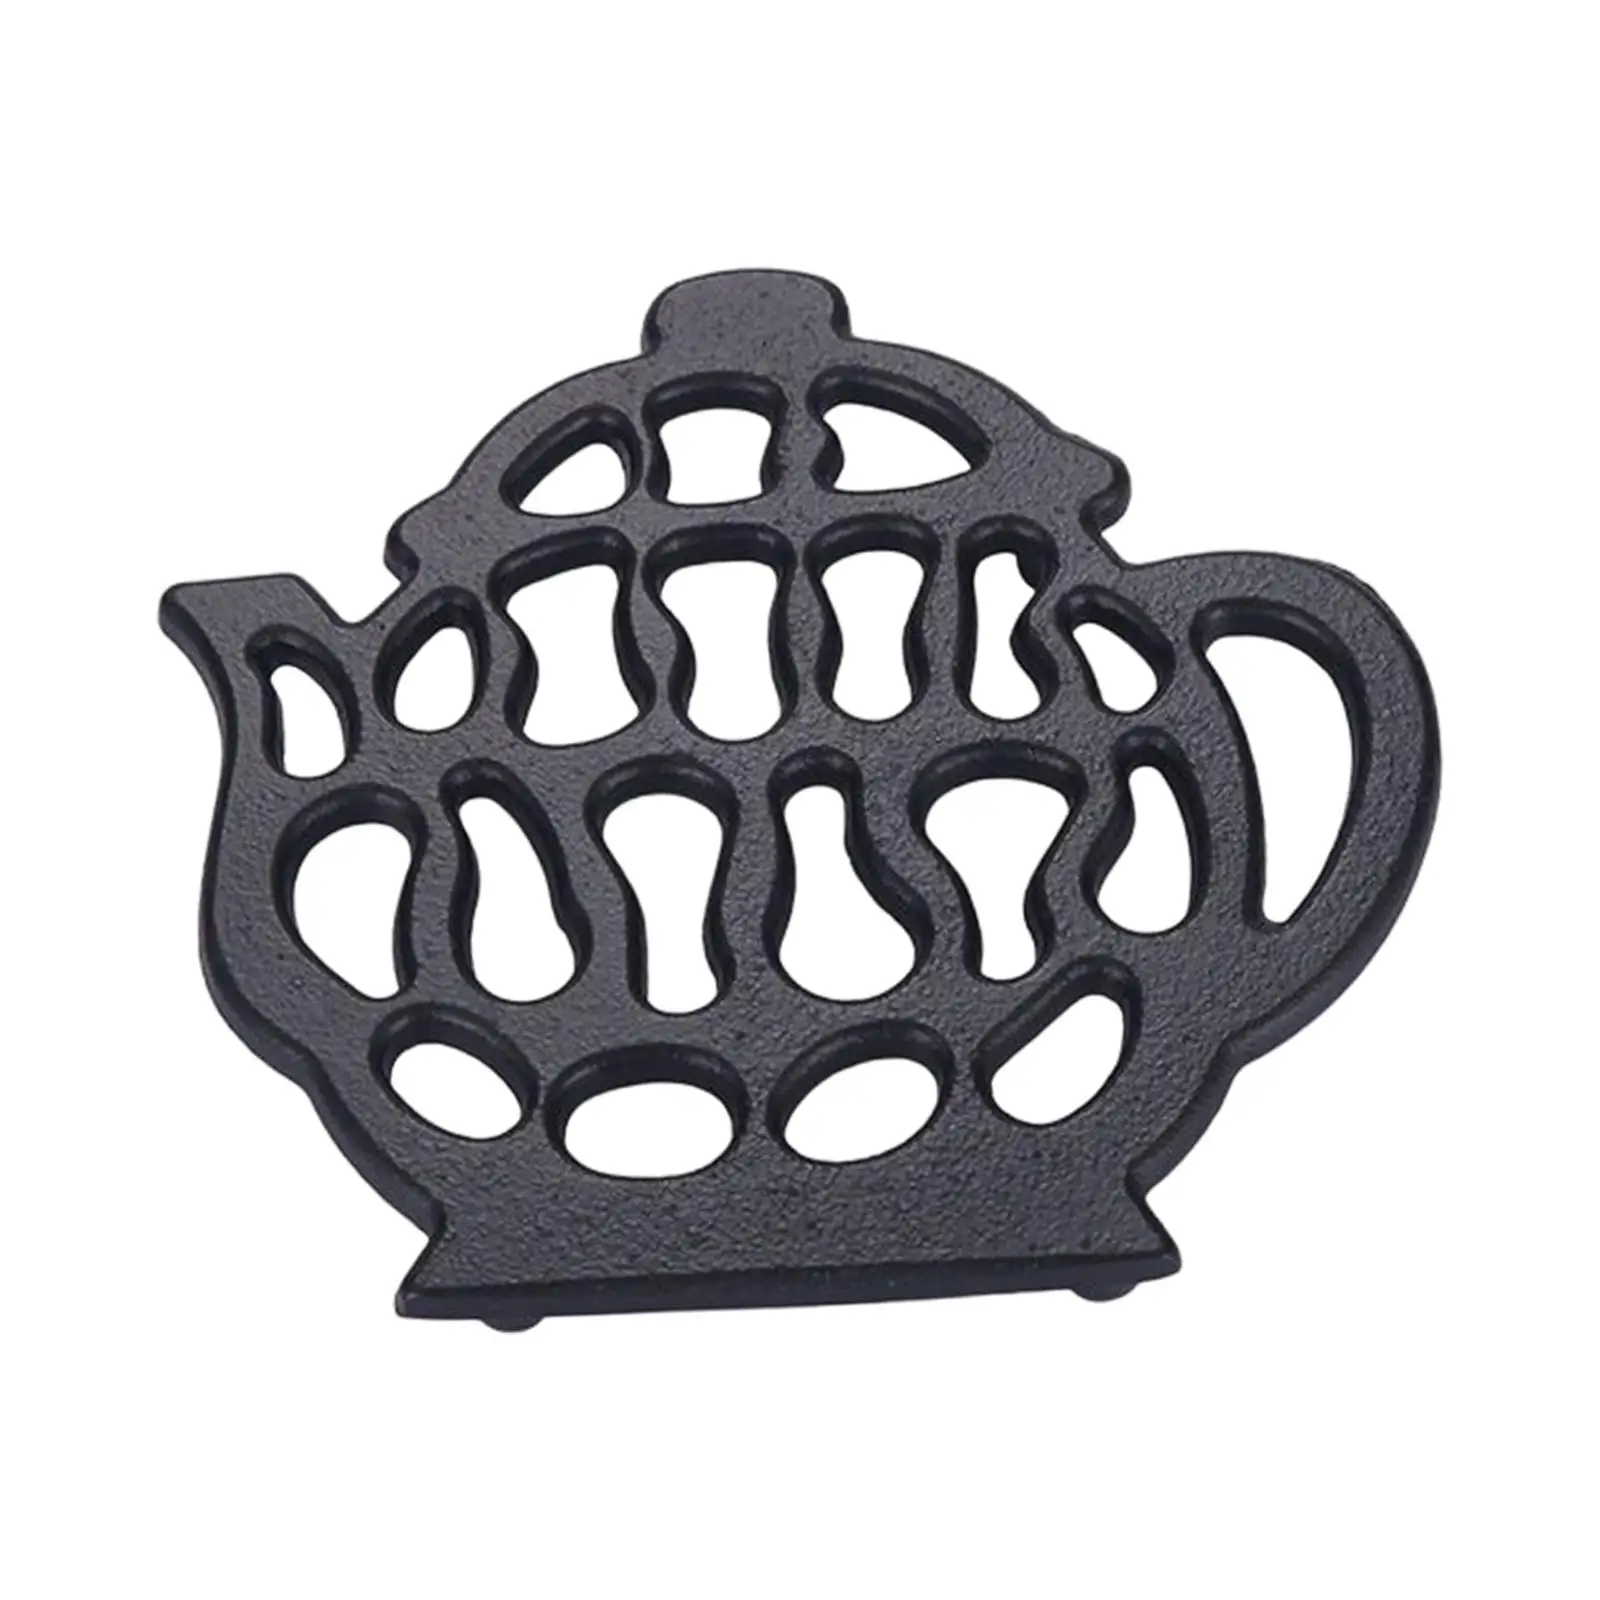 Teapot Cast Iron Trivets Heat Resistant Vintage Exquisite Insulated Pad Thermal Holder Teaware for Kitchen Pots Pans Dishes Cup